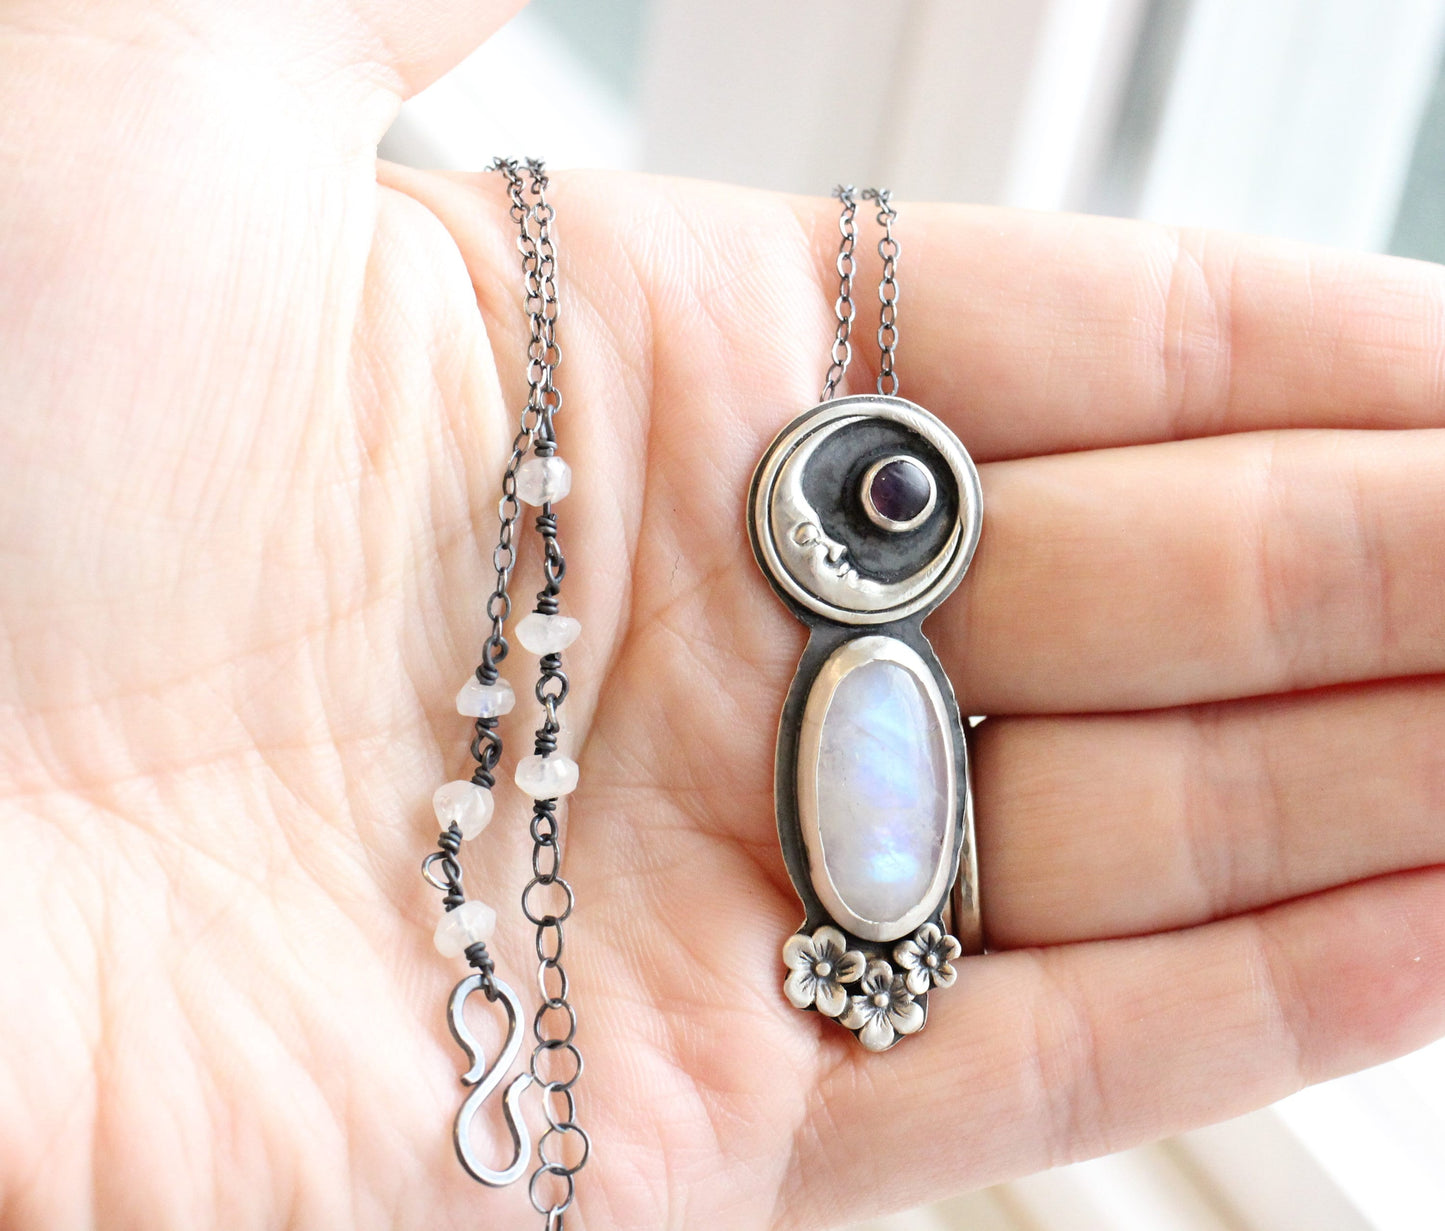 Moonstone Necklace // Sterling Silver Moonstone Flower Necklace with Amethyst Accent // Large Moonstone Pendant // Valentine's Day Gift